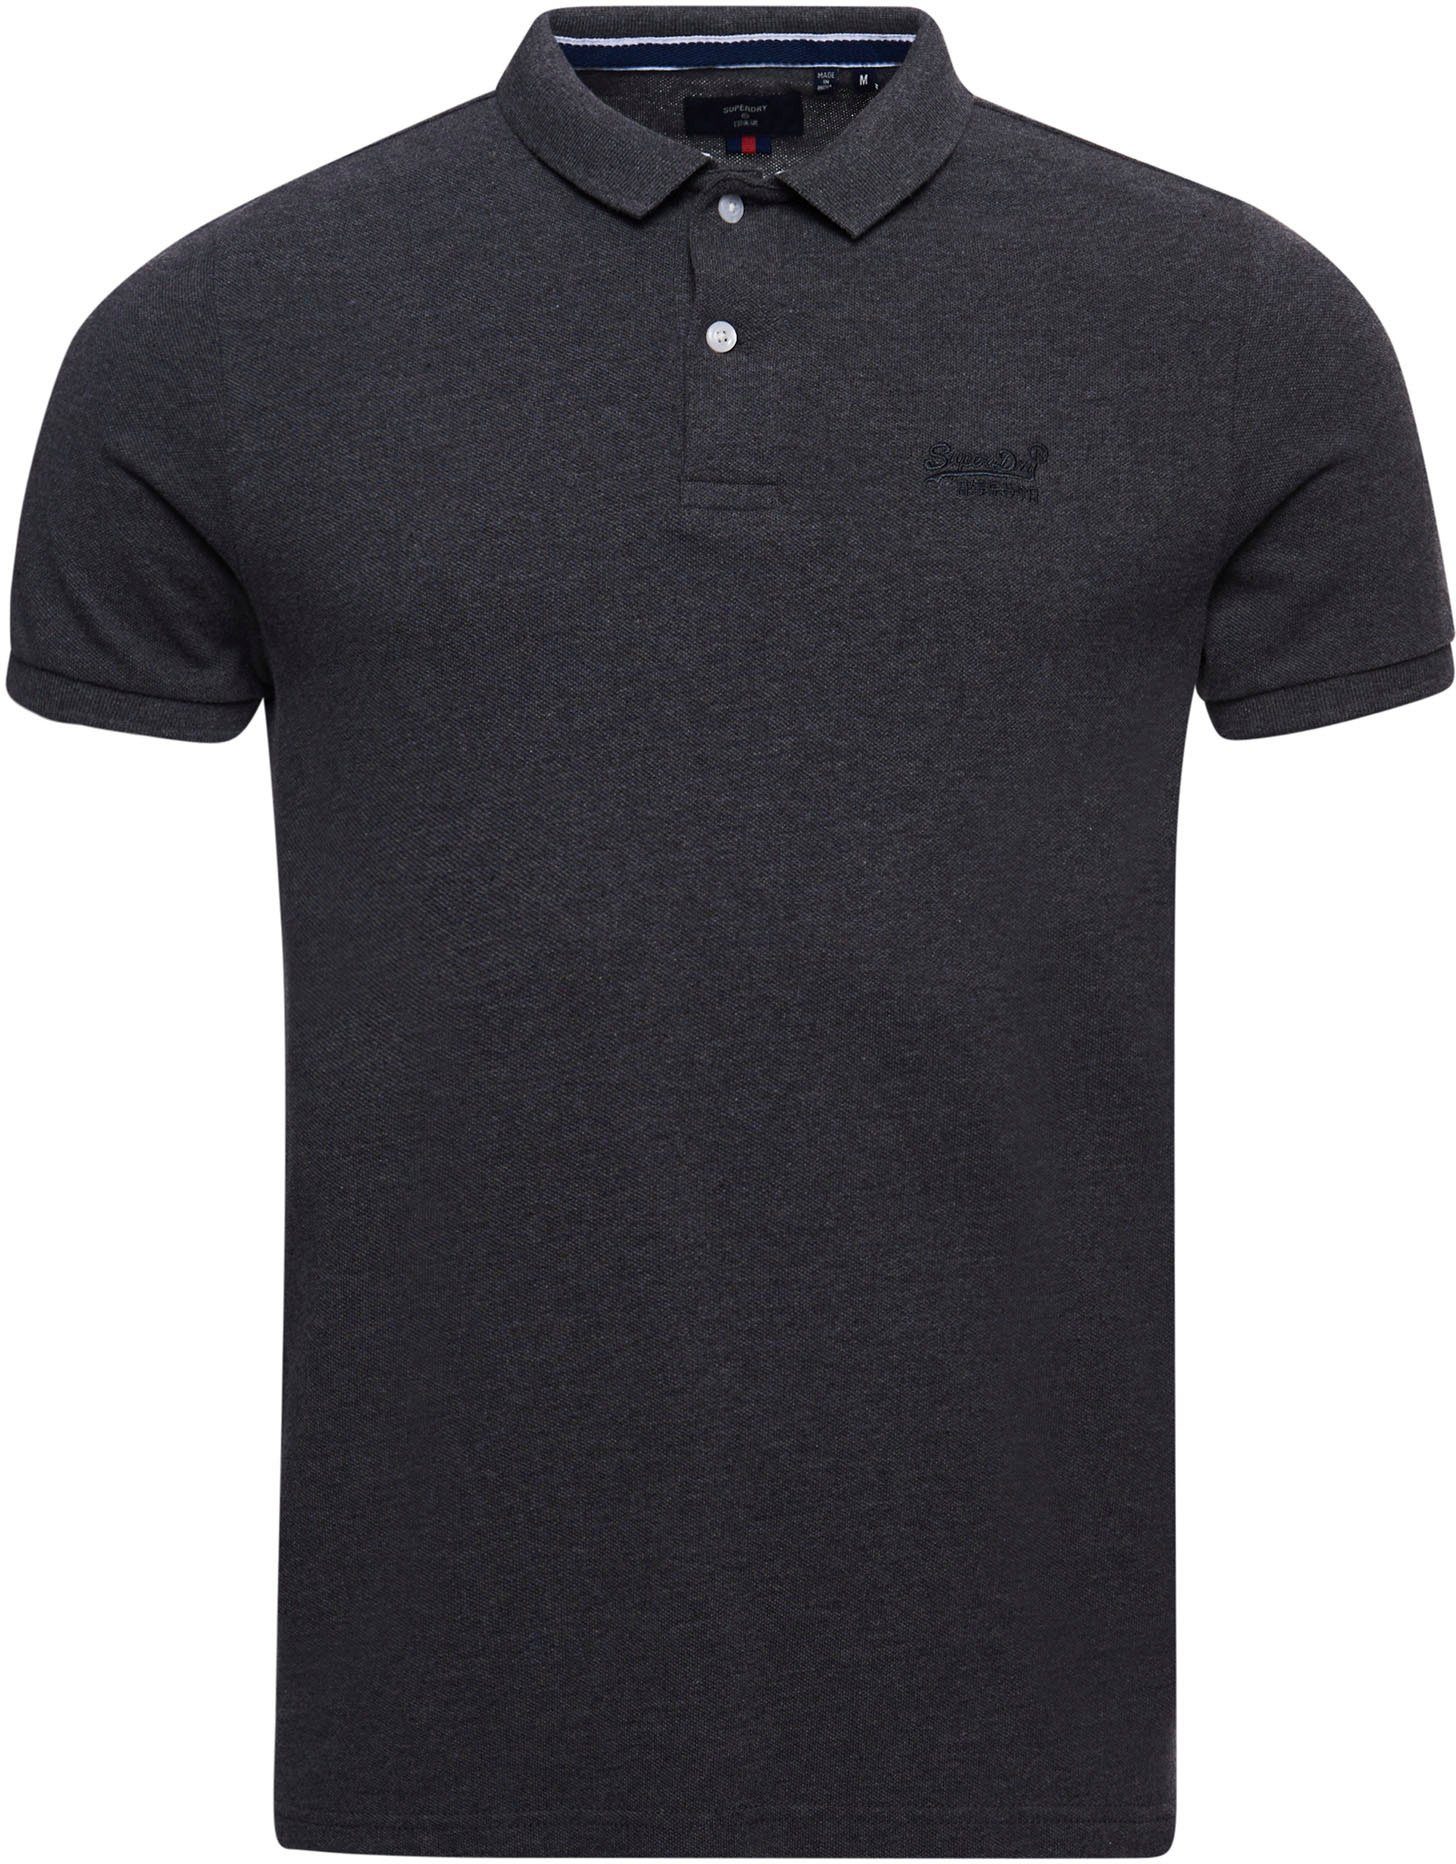 Superdry CLASSIC rich marl POLO PIQUE Poloshirt charcoal